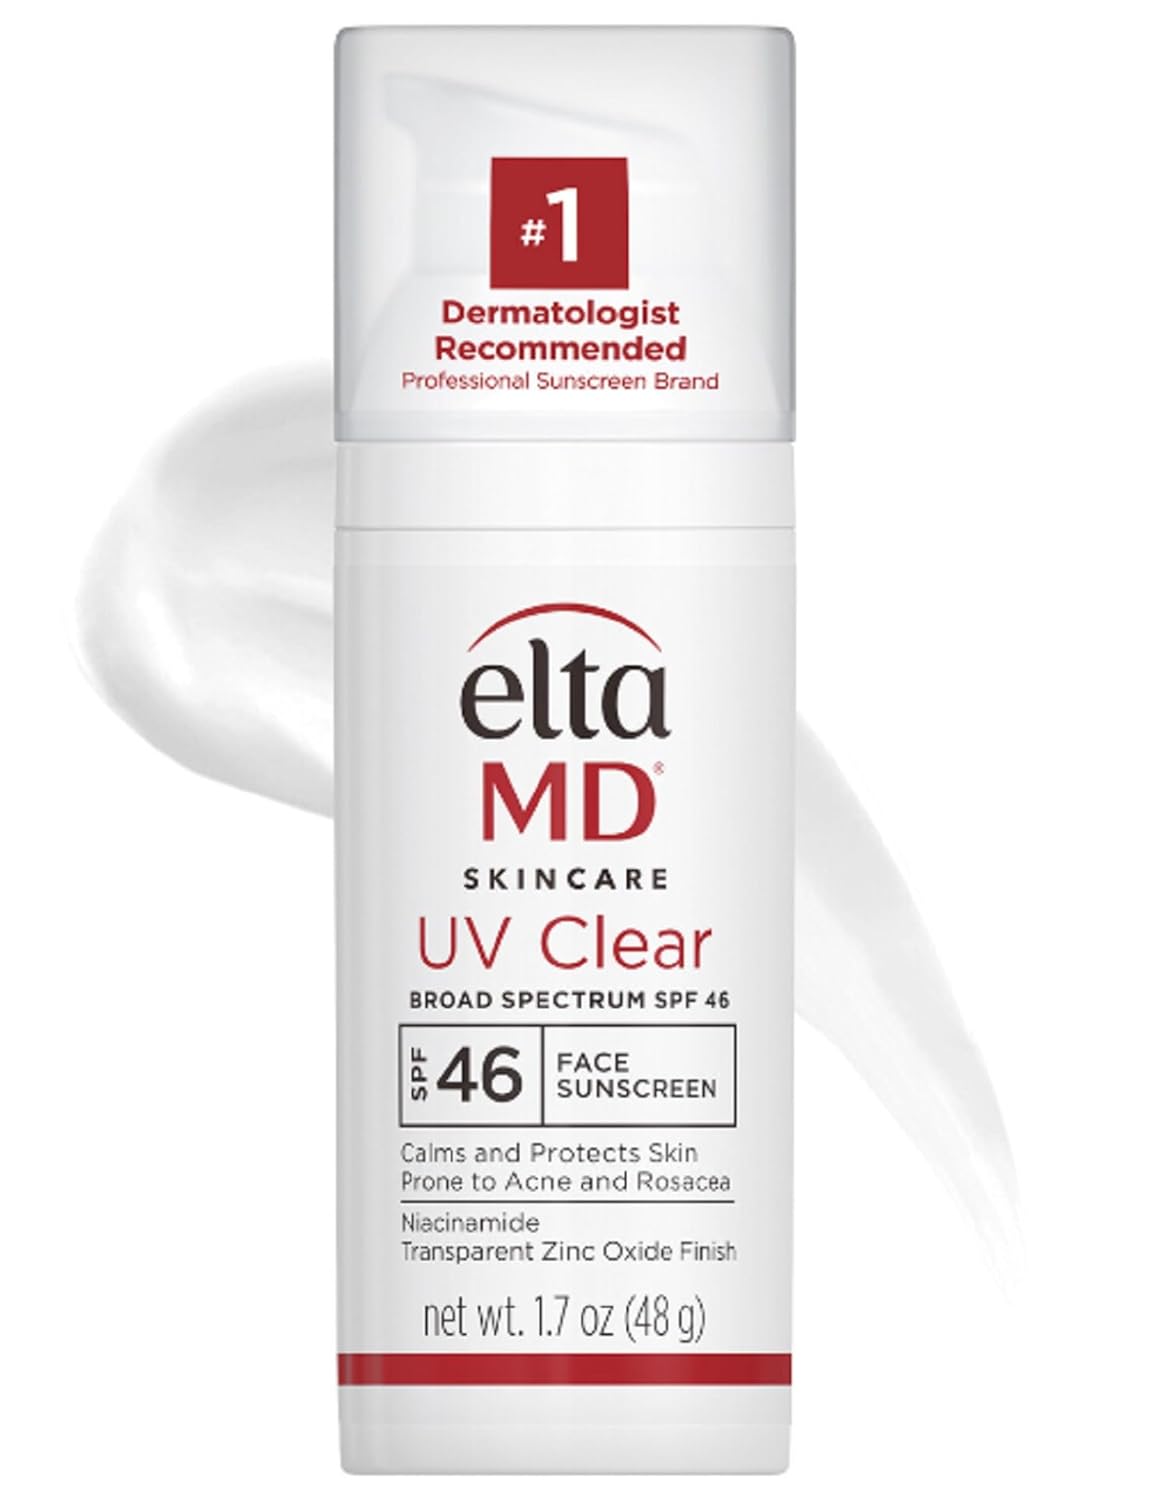 A bottle of EltaMD UV Clear Face Sunscreen, SPF 46 Oil Free Sunscreen with Zinc Oxide, Protects and Calms Sensitive Skin and Acne-Prone Skin, Lightweight, Silky, Dermatologist Recommended, 1.7 oz Pump on a white background